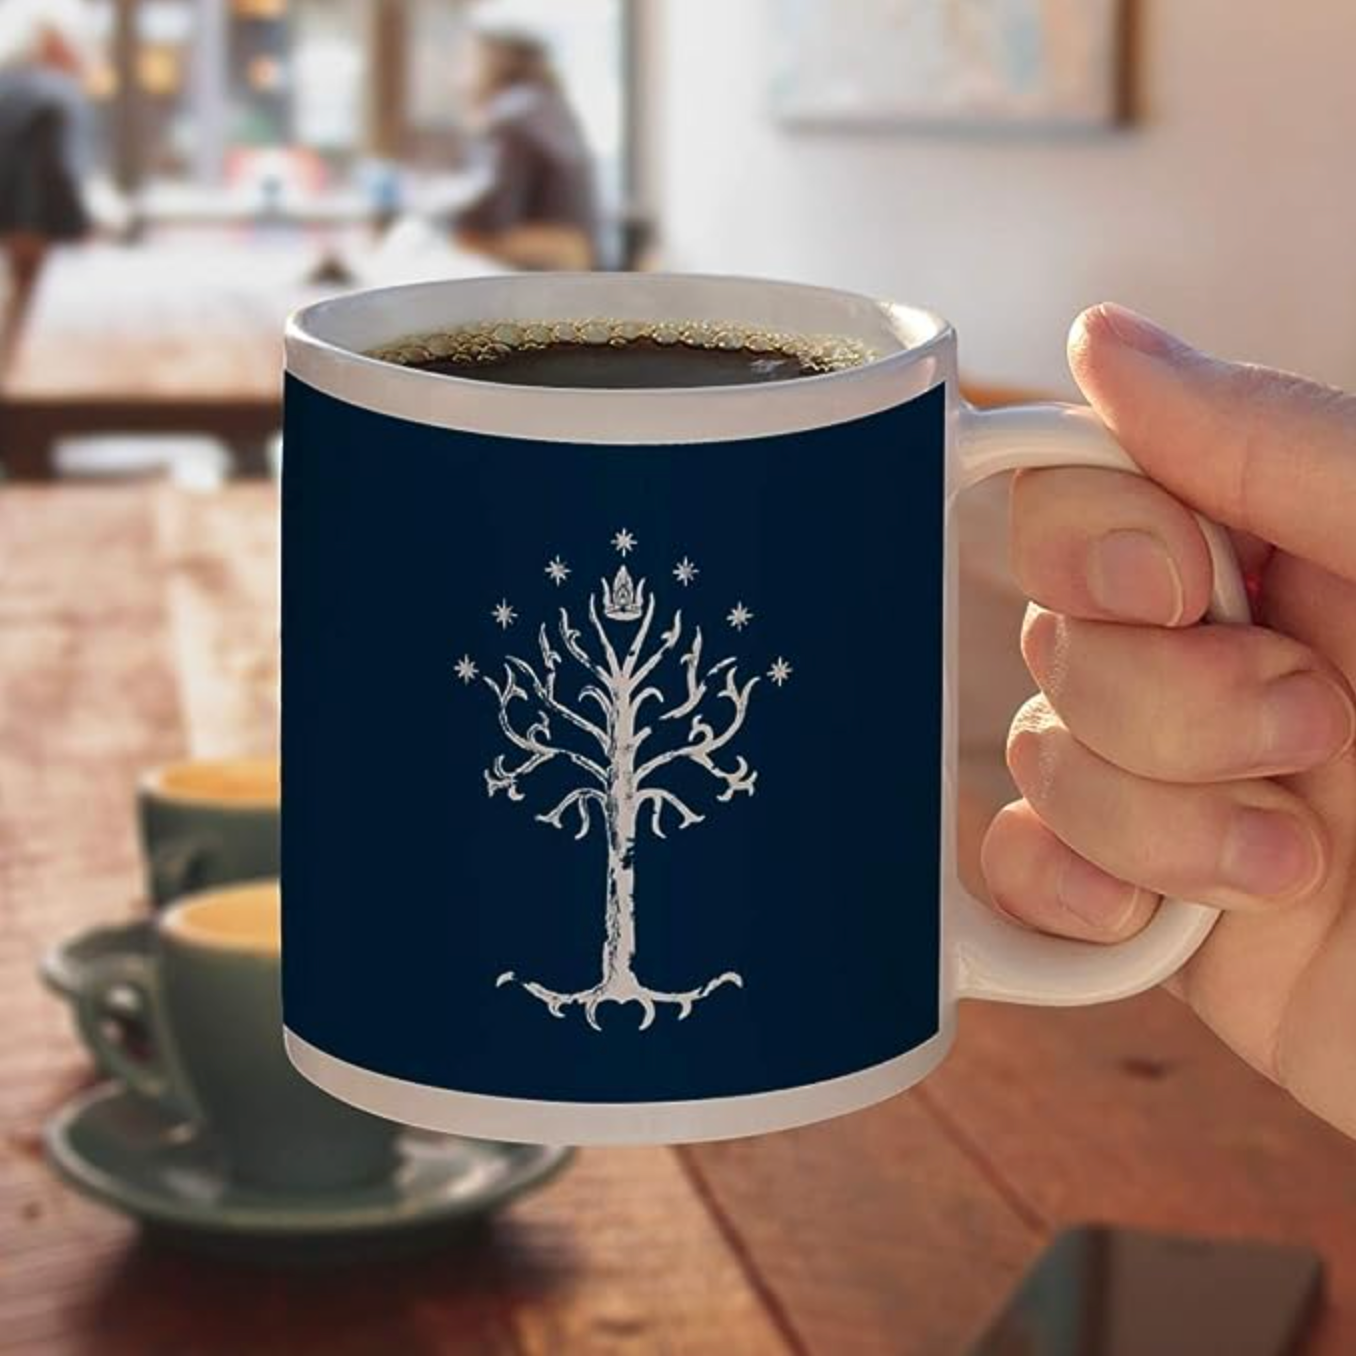 Lord of The Rings: Elven Mug